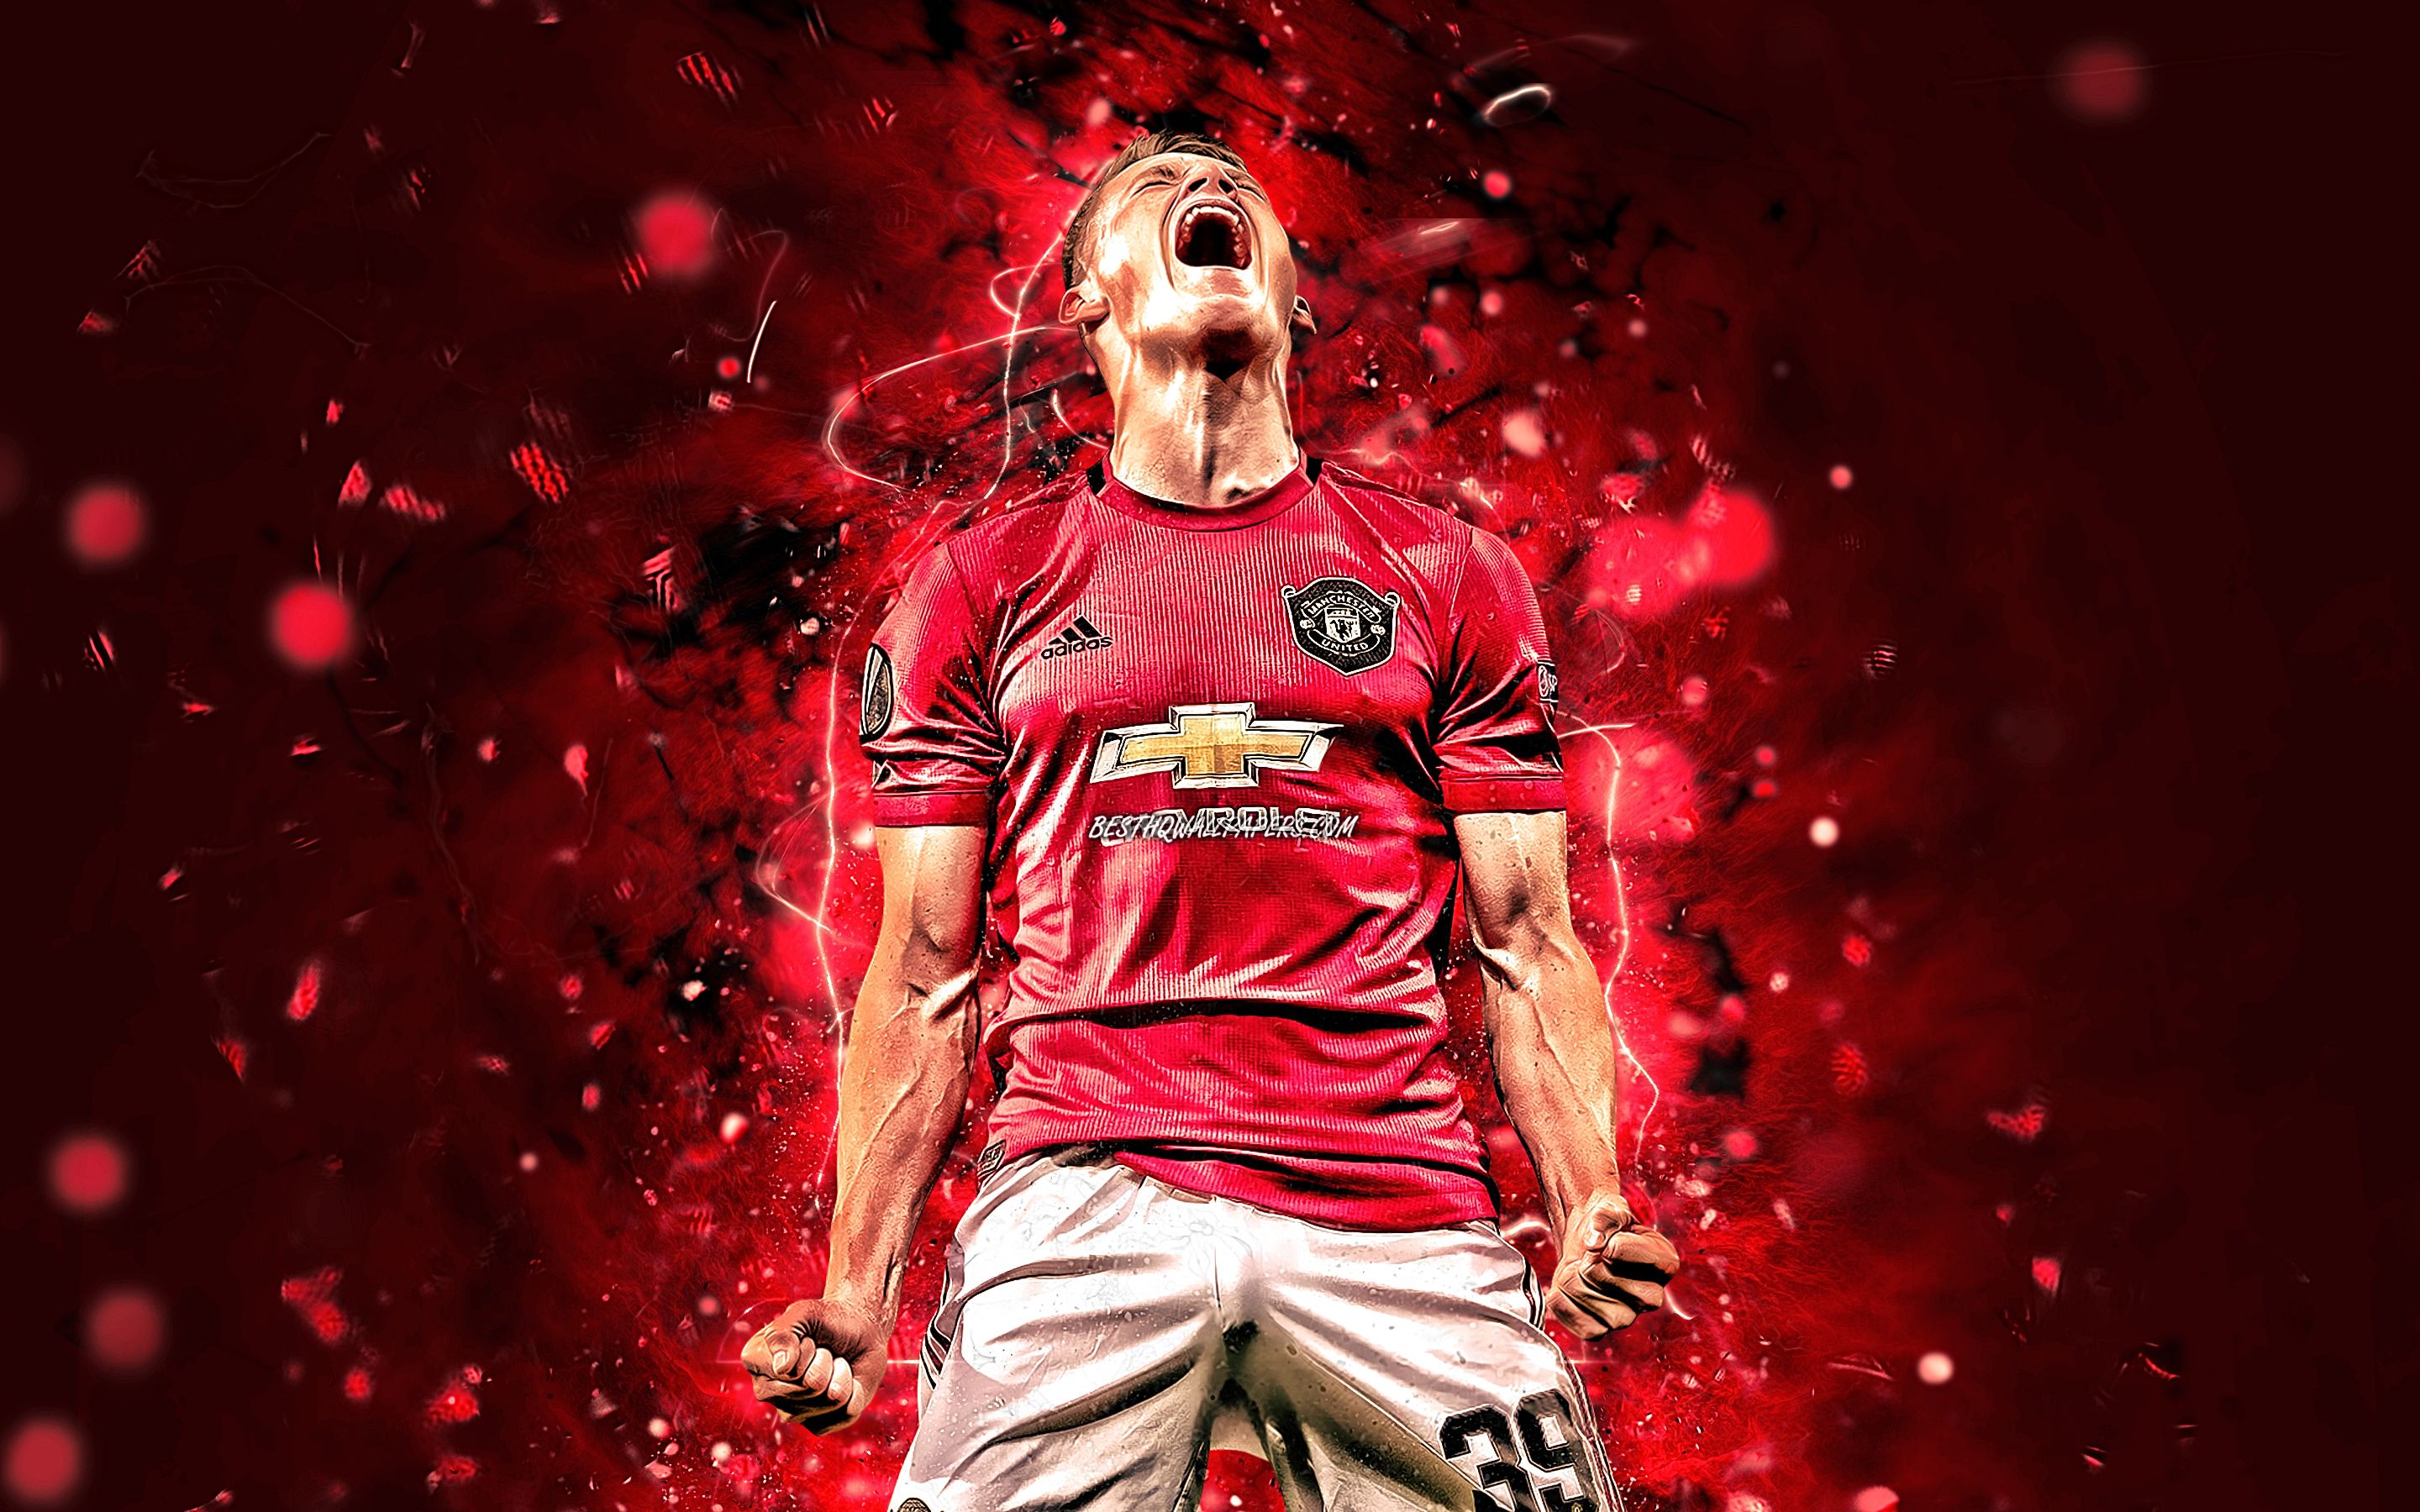 Download wallpaper Scott McTominay, Manchester United FC, joy, english footballers, Premier League, Scott Francis McTominay, red neon lights, Scott McTominay Manchester United, soccer, football, Man United for desktop with resolution 2880x1800